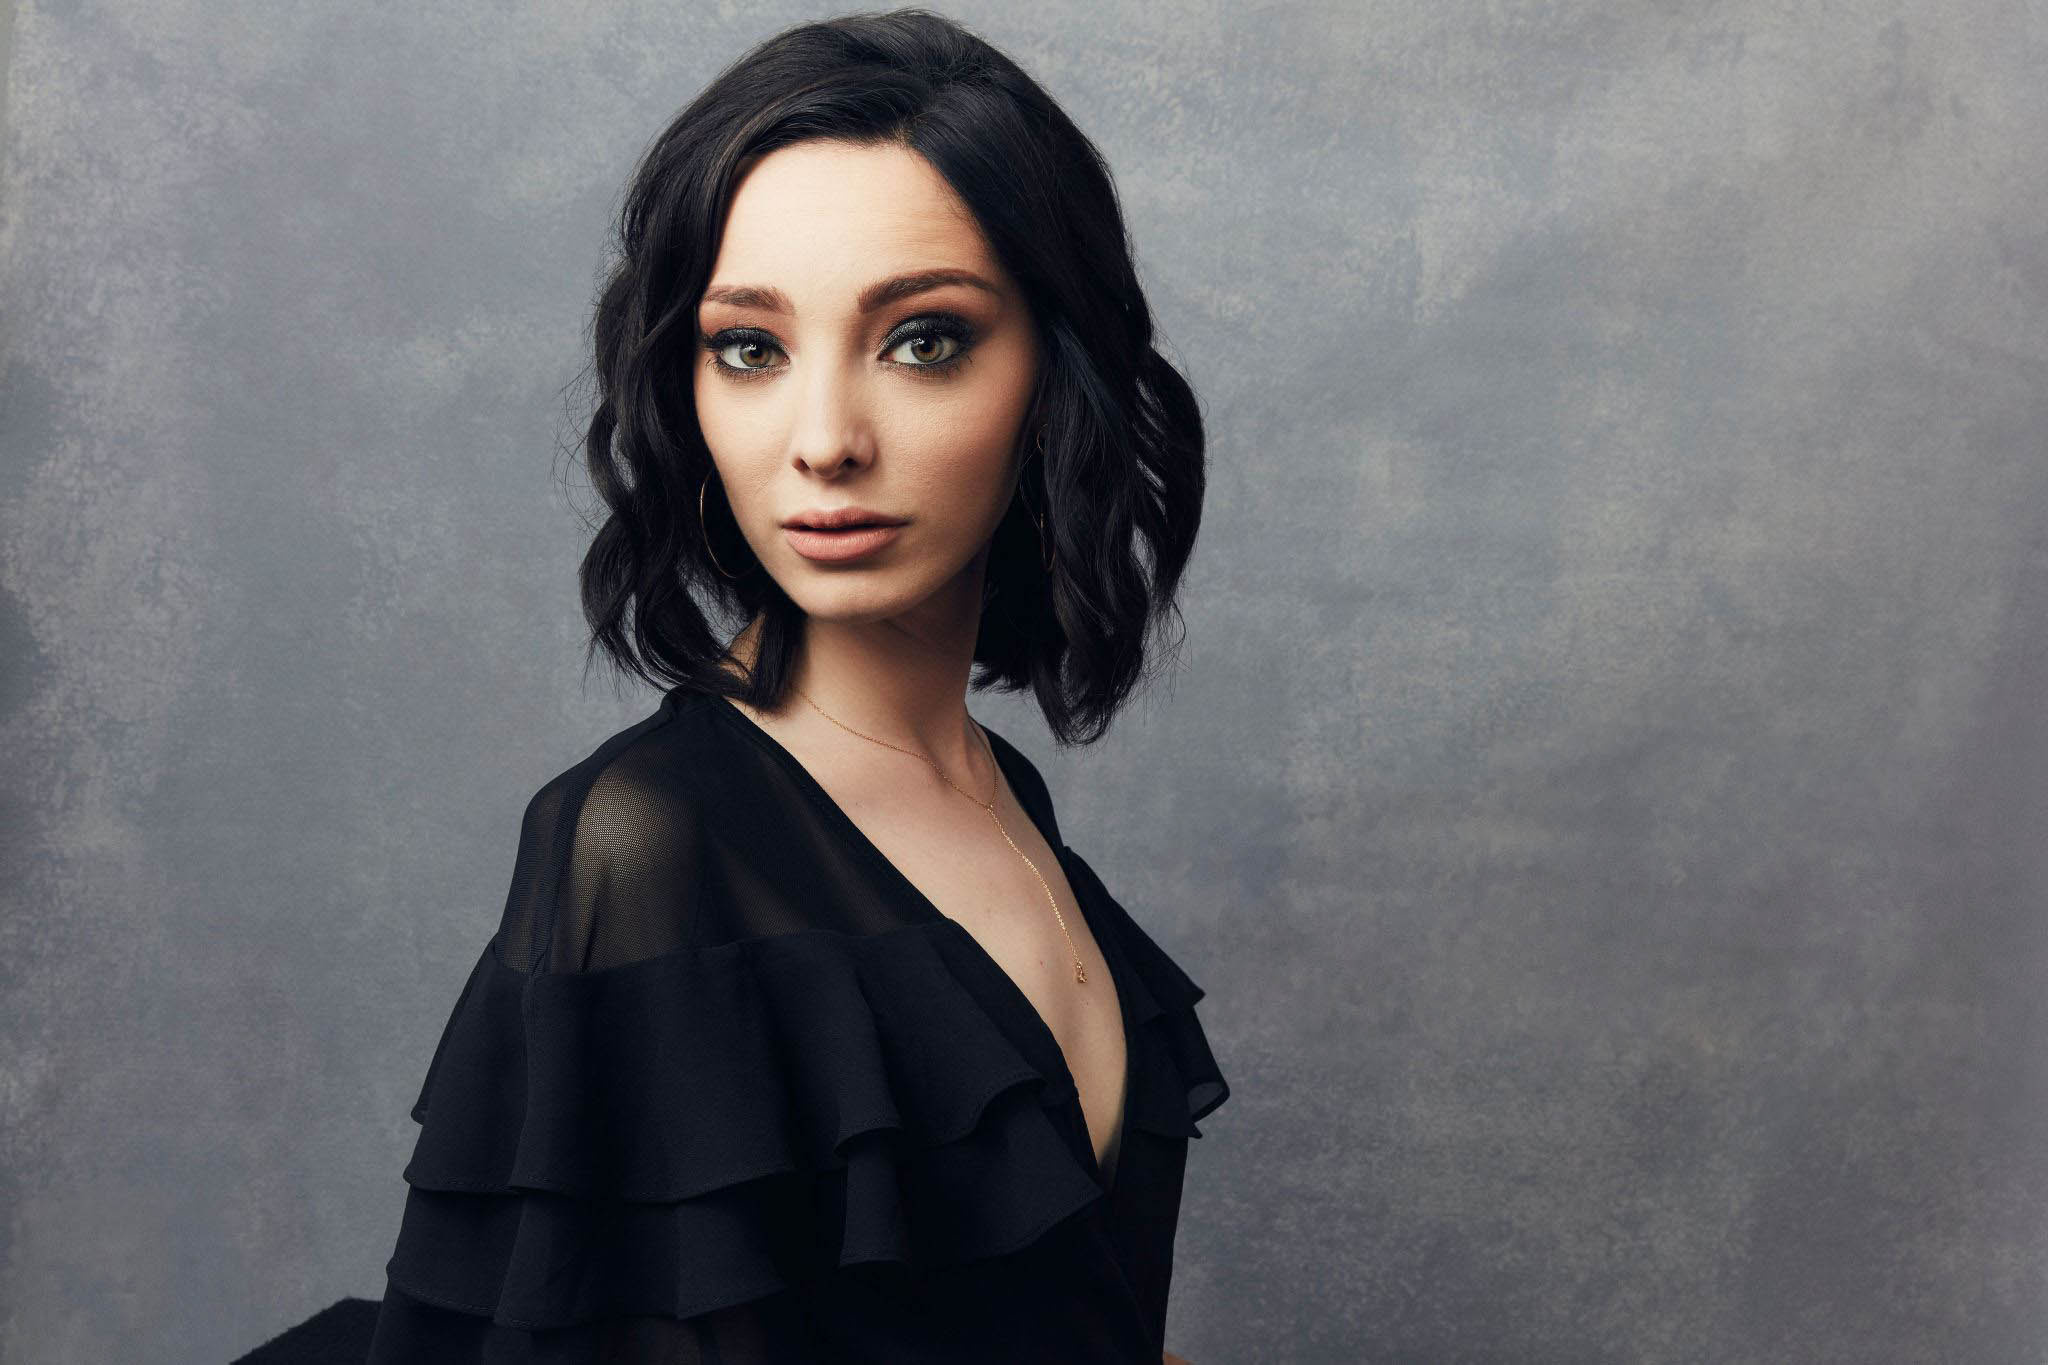 The Gifted Season 1 Cast Portrait - Emma Dumont - The Gifted TV Series Photo 41054504 - Fanpop 2050x1370